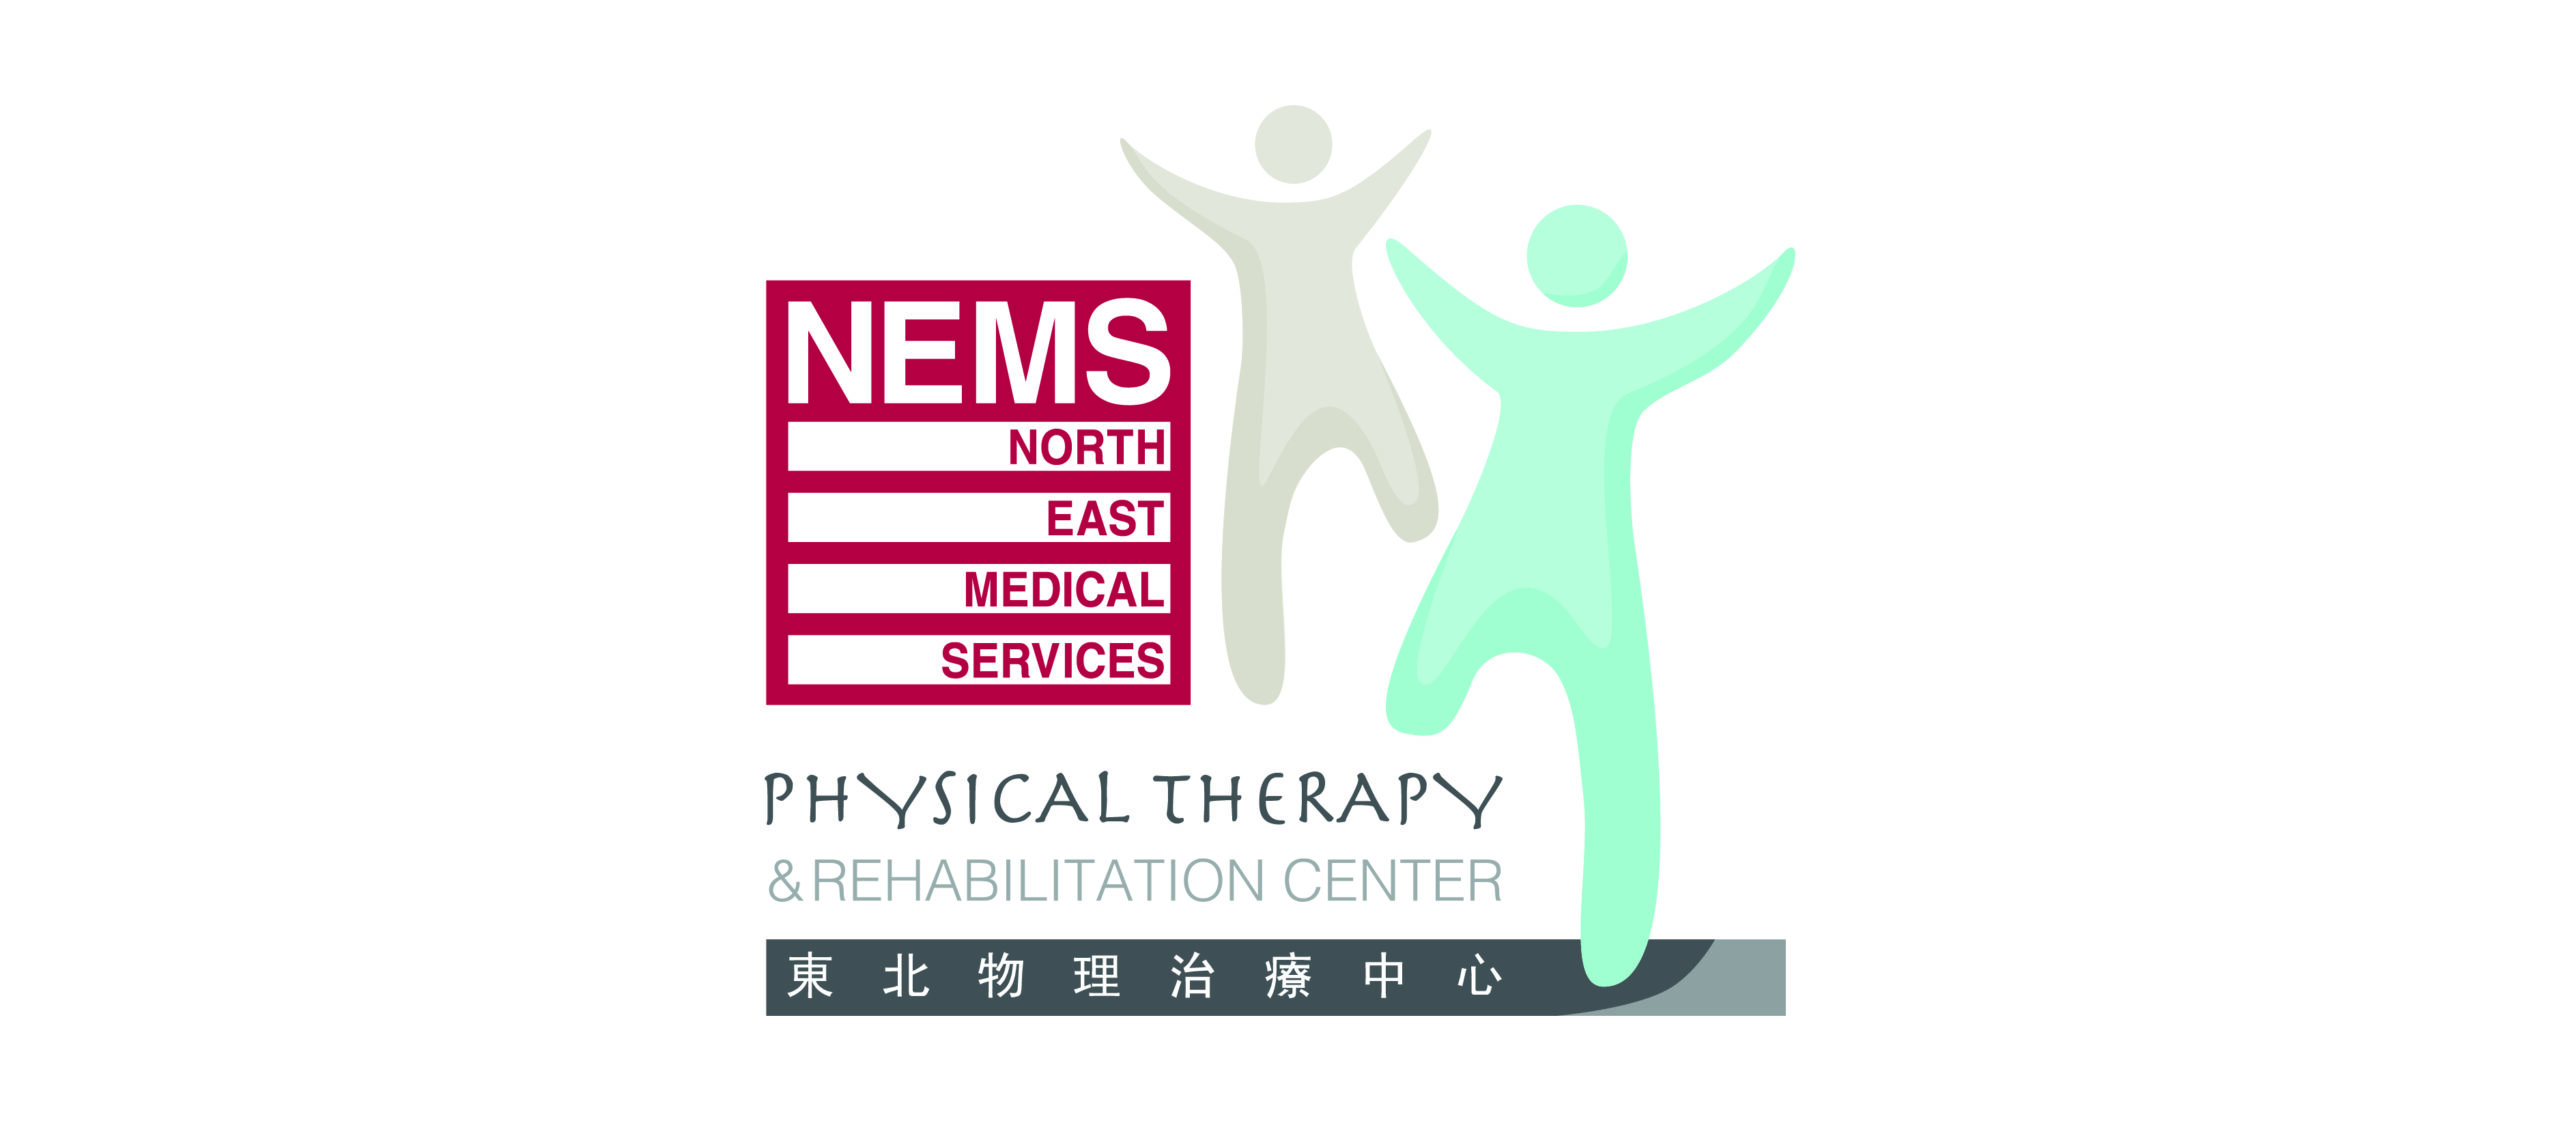 NEMS Physical Therapy & Rehabilitation Center